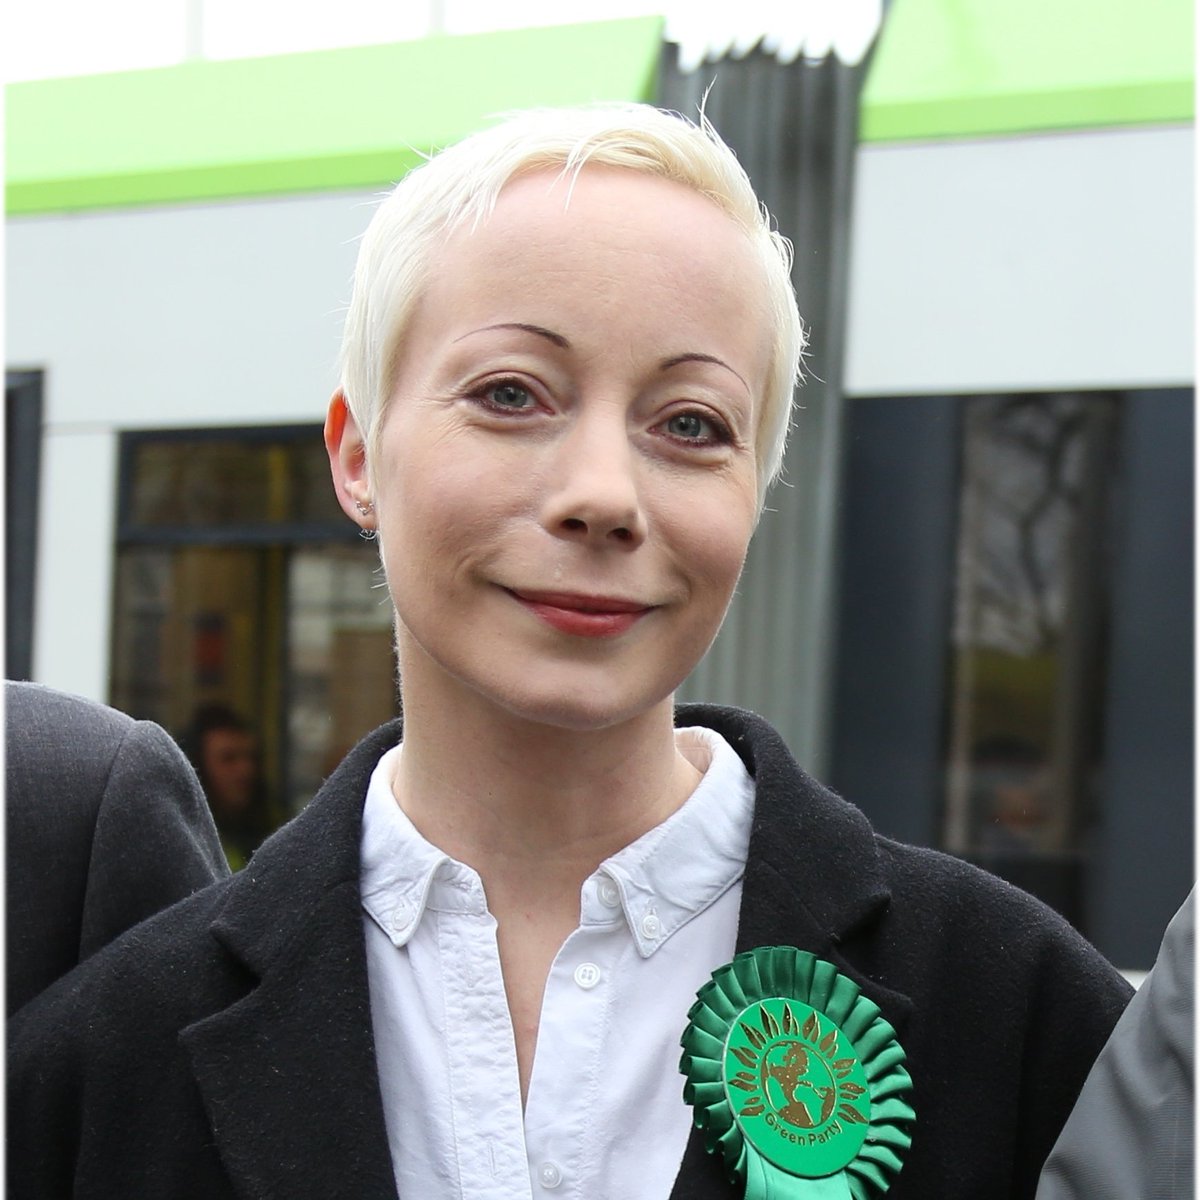 The Green Party in Croydon is pleased to announce that Esther Sutton has been selected as the candidate for the Fairfield Ward by-election to Croydon Council. croydon.greenparty.org.uk/news/2019/10/2…